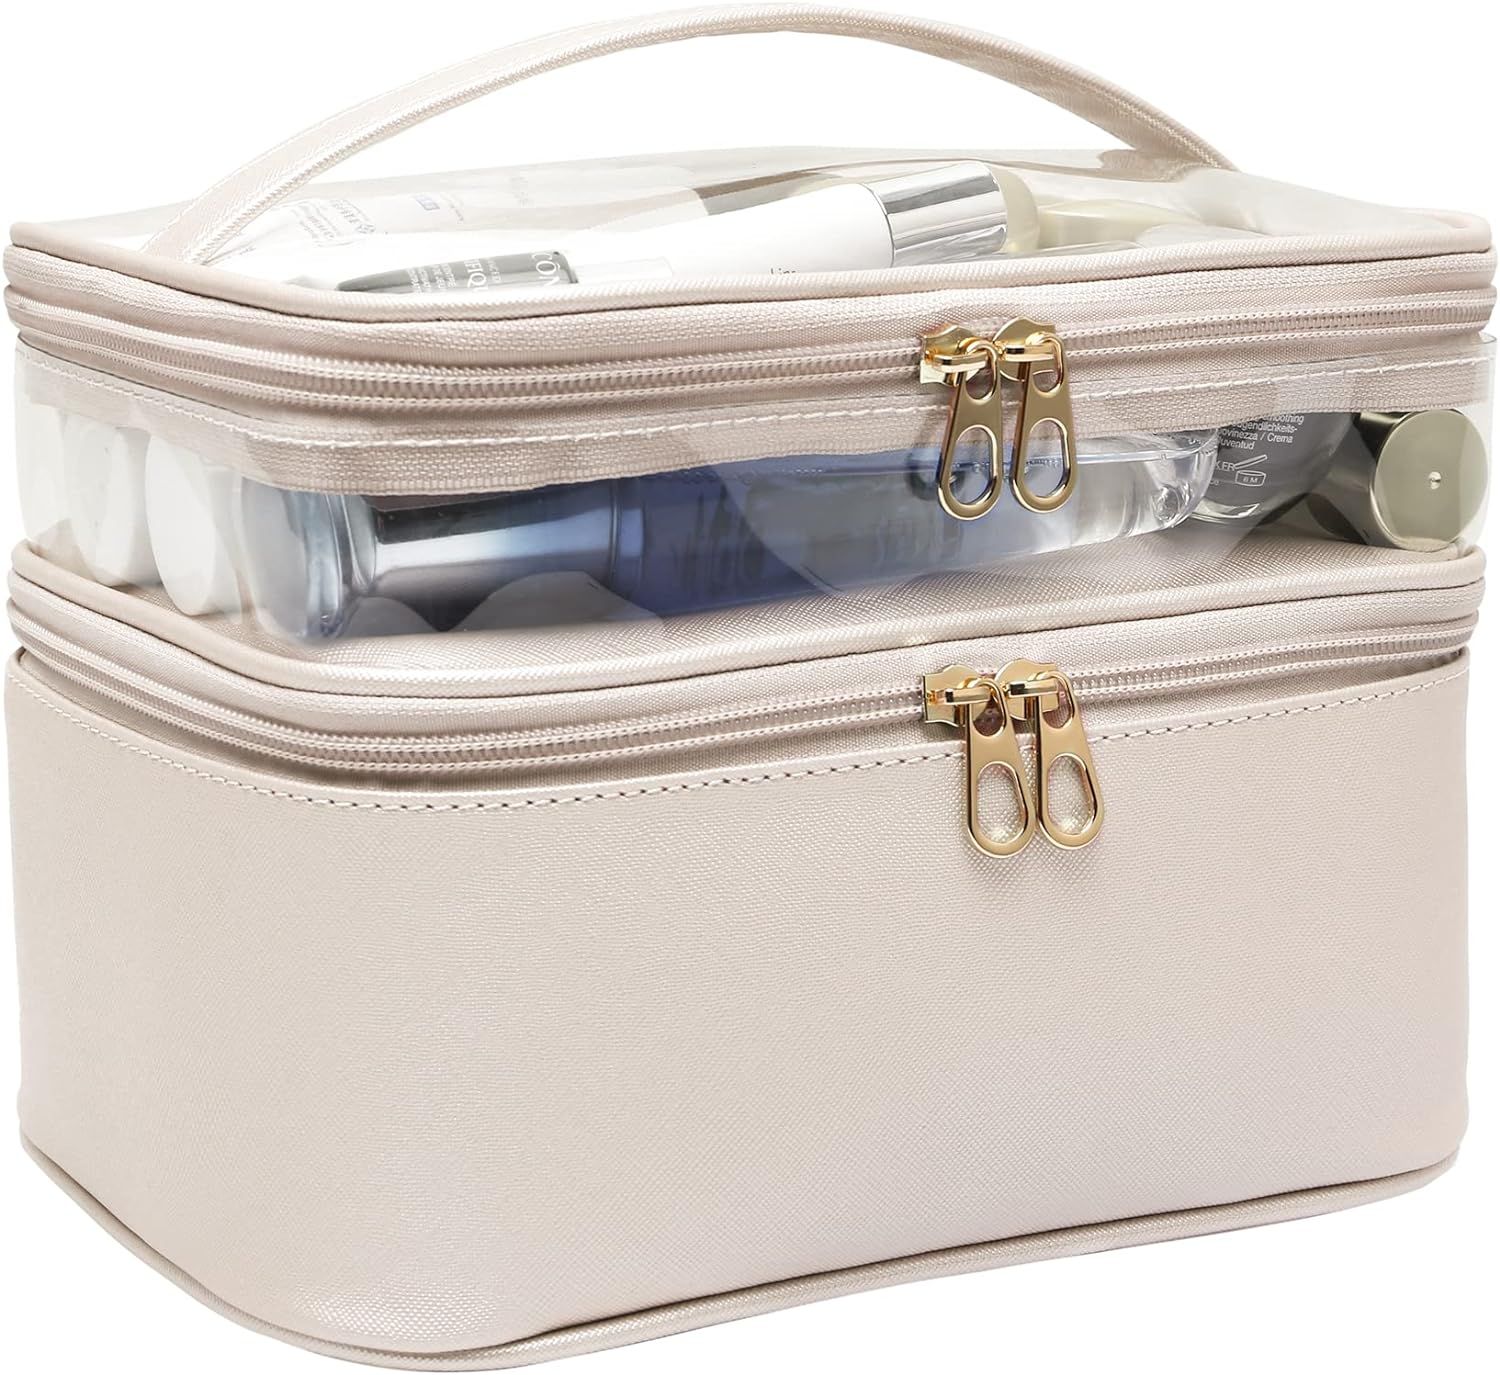 Makeup-Bag,Large Leather Makeup-Organizer for Travel-Accessories Clear-Cosmetic-Bag,Portable Travel Essentials Bag Makeup Case,Make Up Bag Toiletry Bag for Women,College Dorm Room Essentials for Girls | Amazon (US)